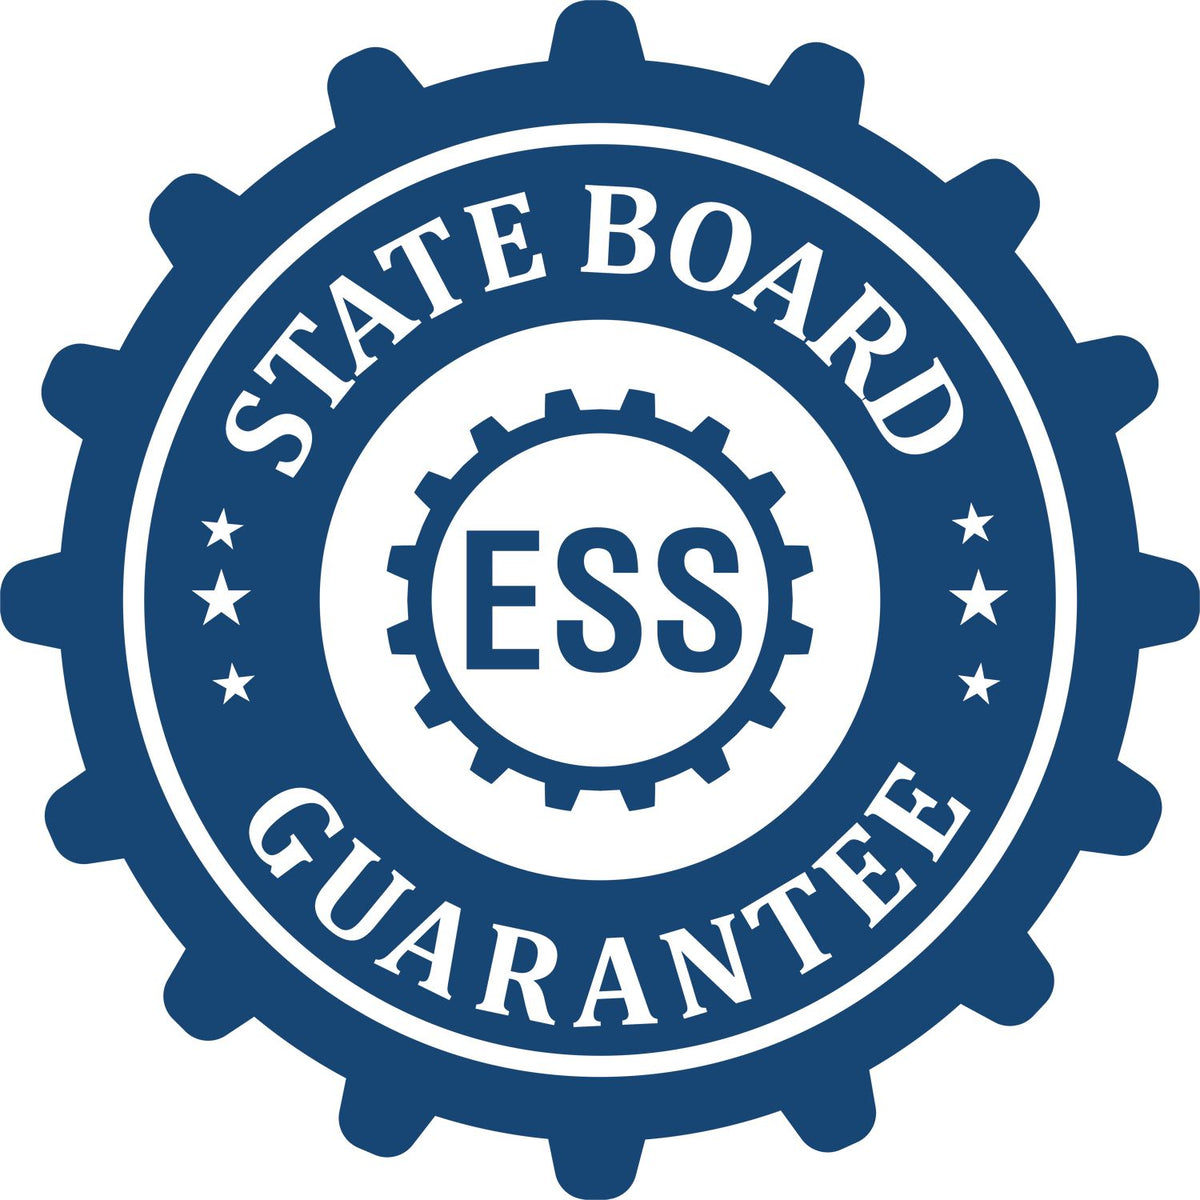 An emblem in a gear shape illustrating a state board guarantee for the Soft Pocket Texas Landscape Architect Embosser product.